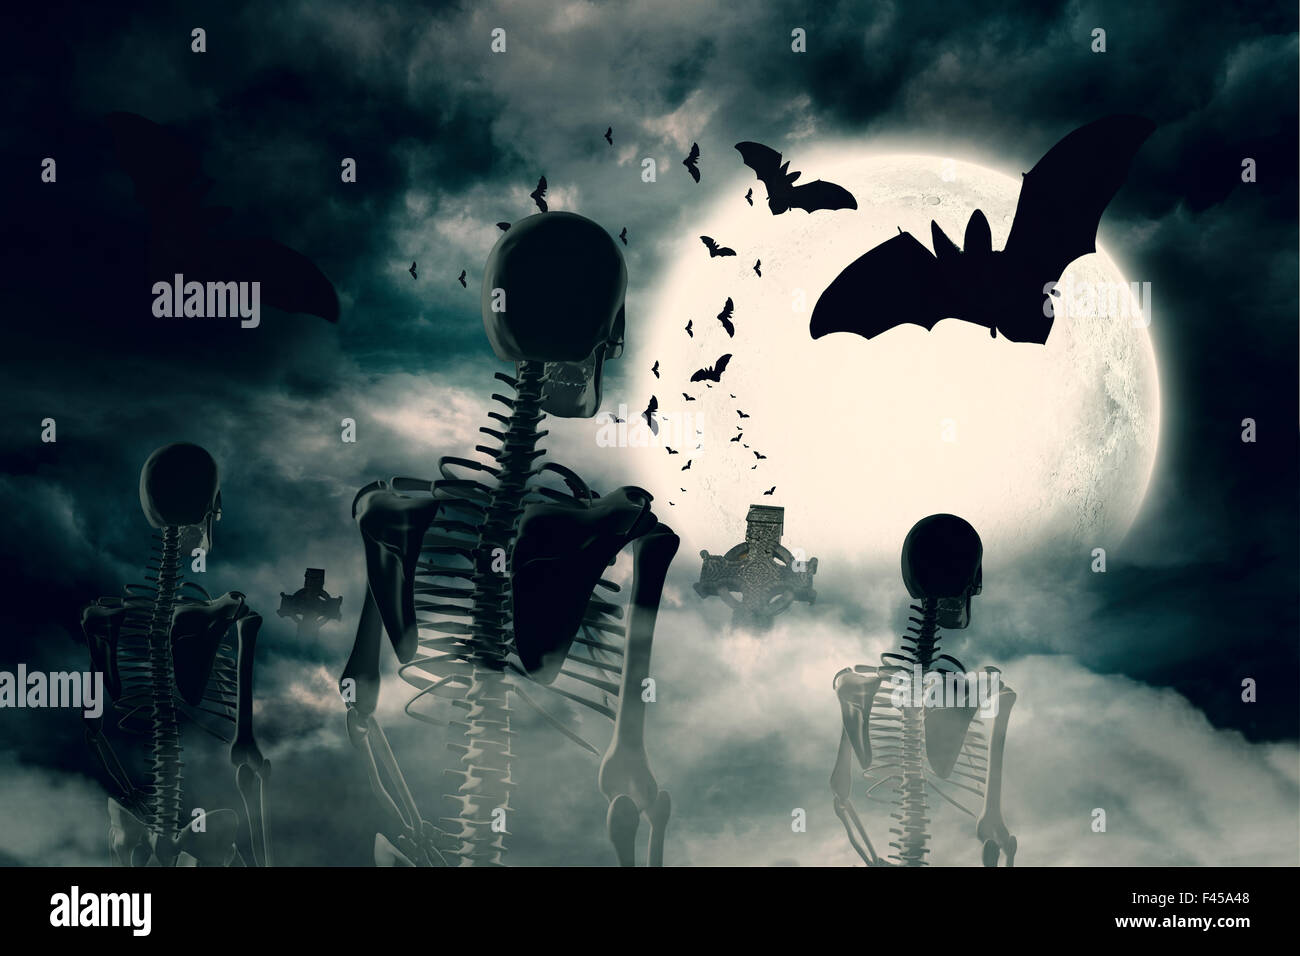 Army of skeletons under full moon Stock Photo